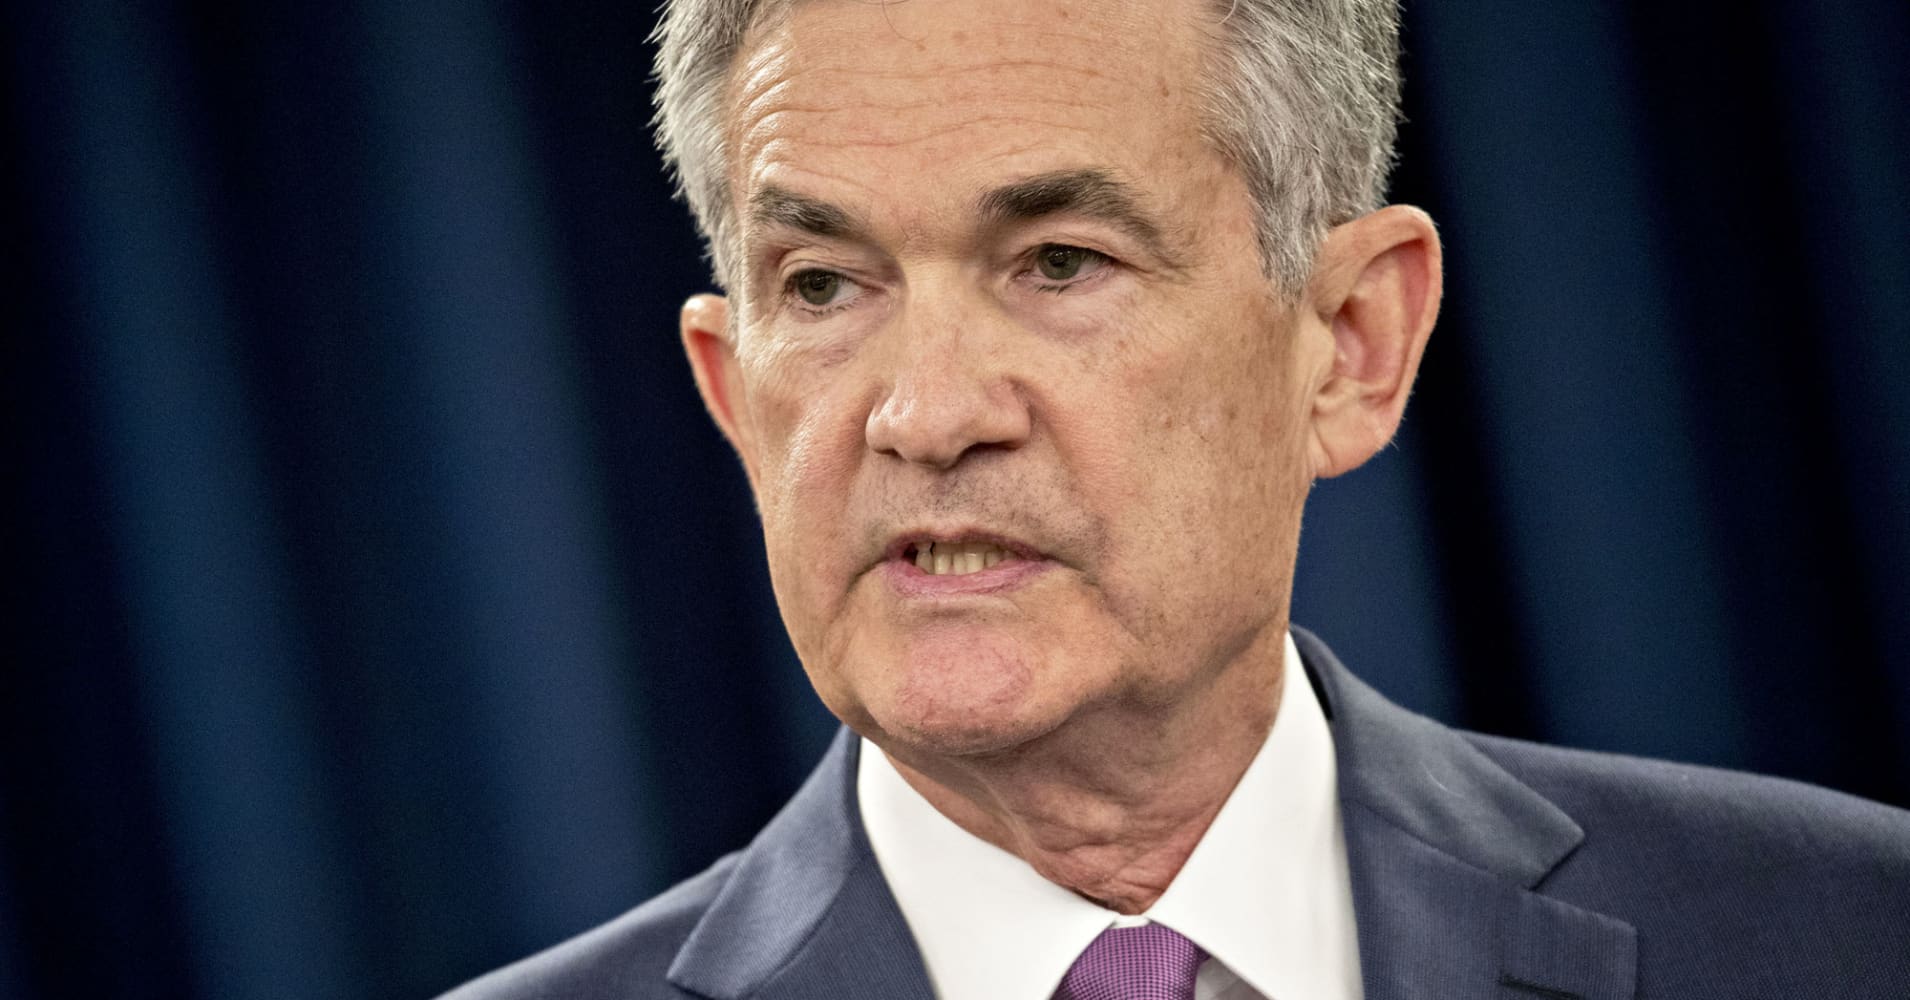 Fed: Letting inflation run too hot could lead to 'a significant economic downturn'